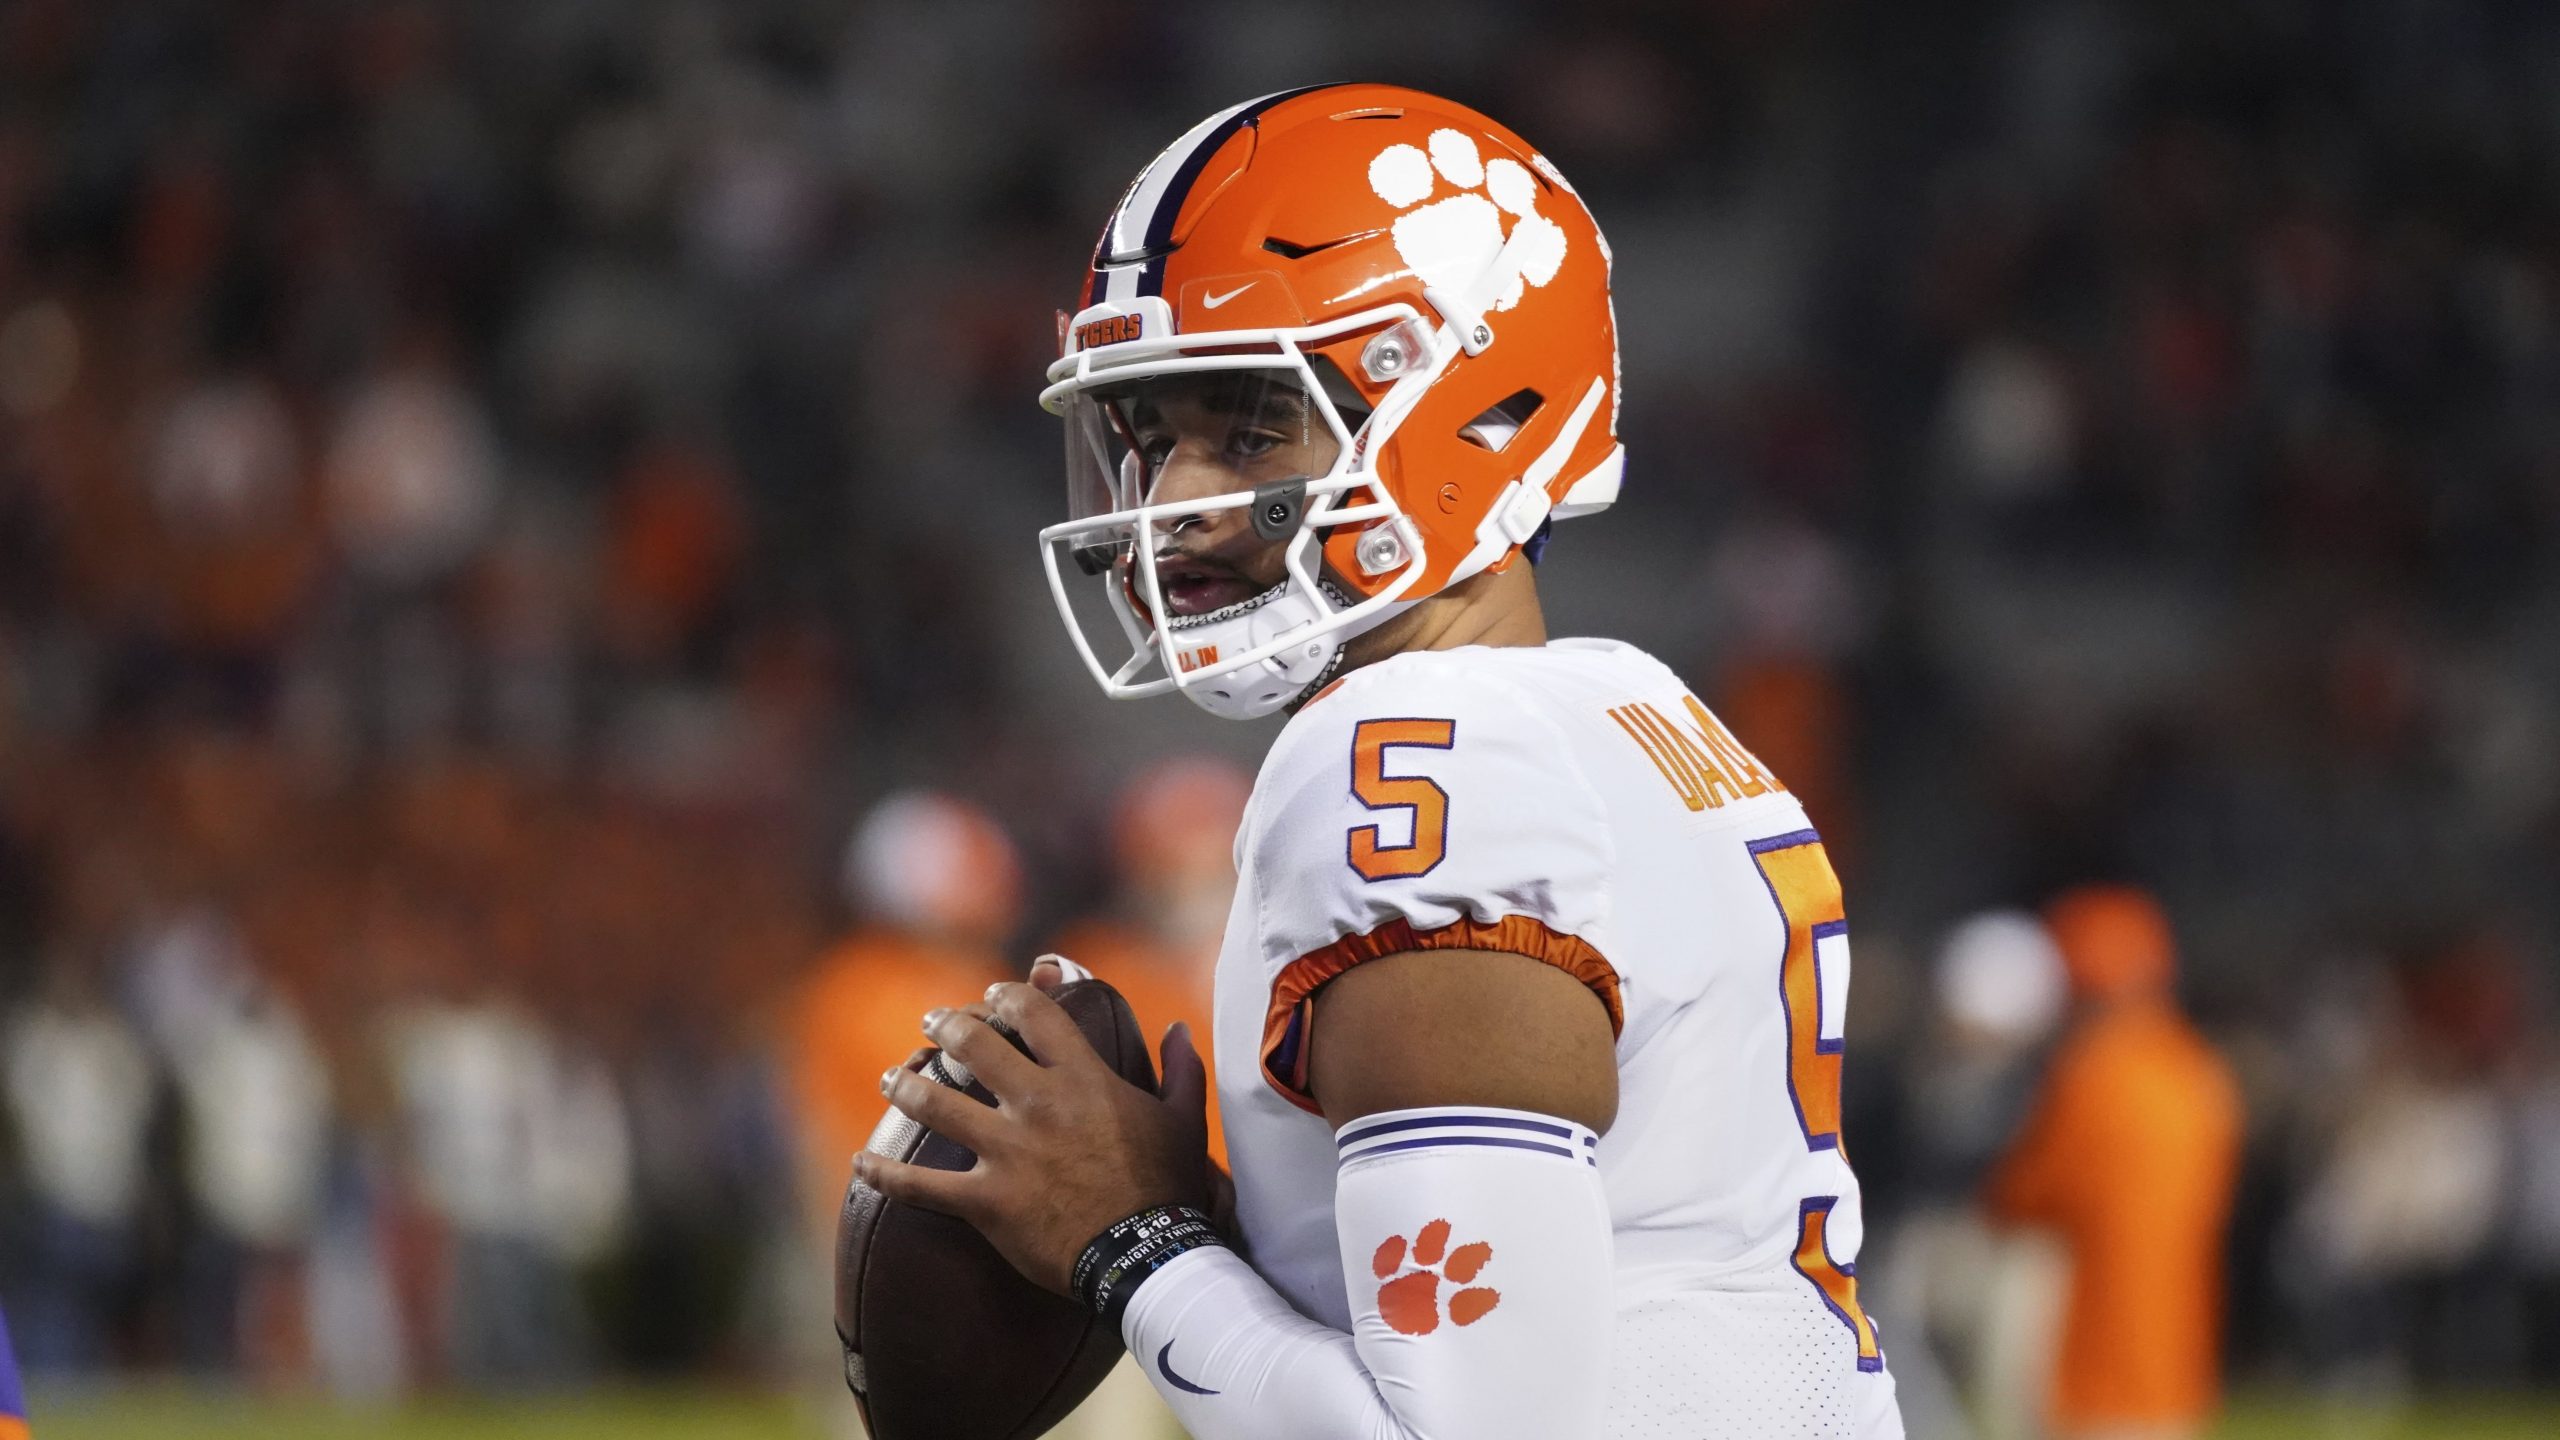 Clemson quarterback D.J. Uiagalelei (5) warms up before an NCAA college football game against South Carolina Saturday, Nov. 27, 2021, in Columbia, S.C. Clemson won 30-0